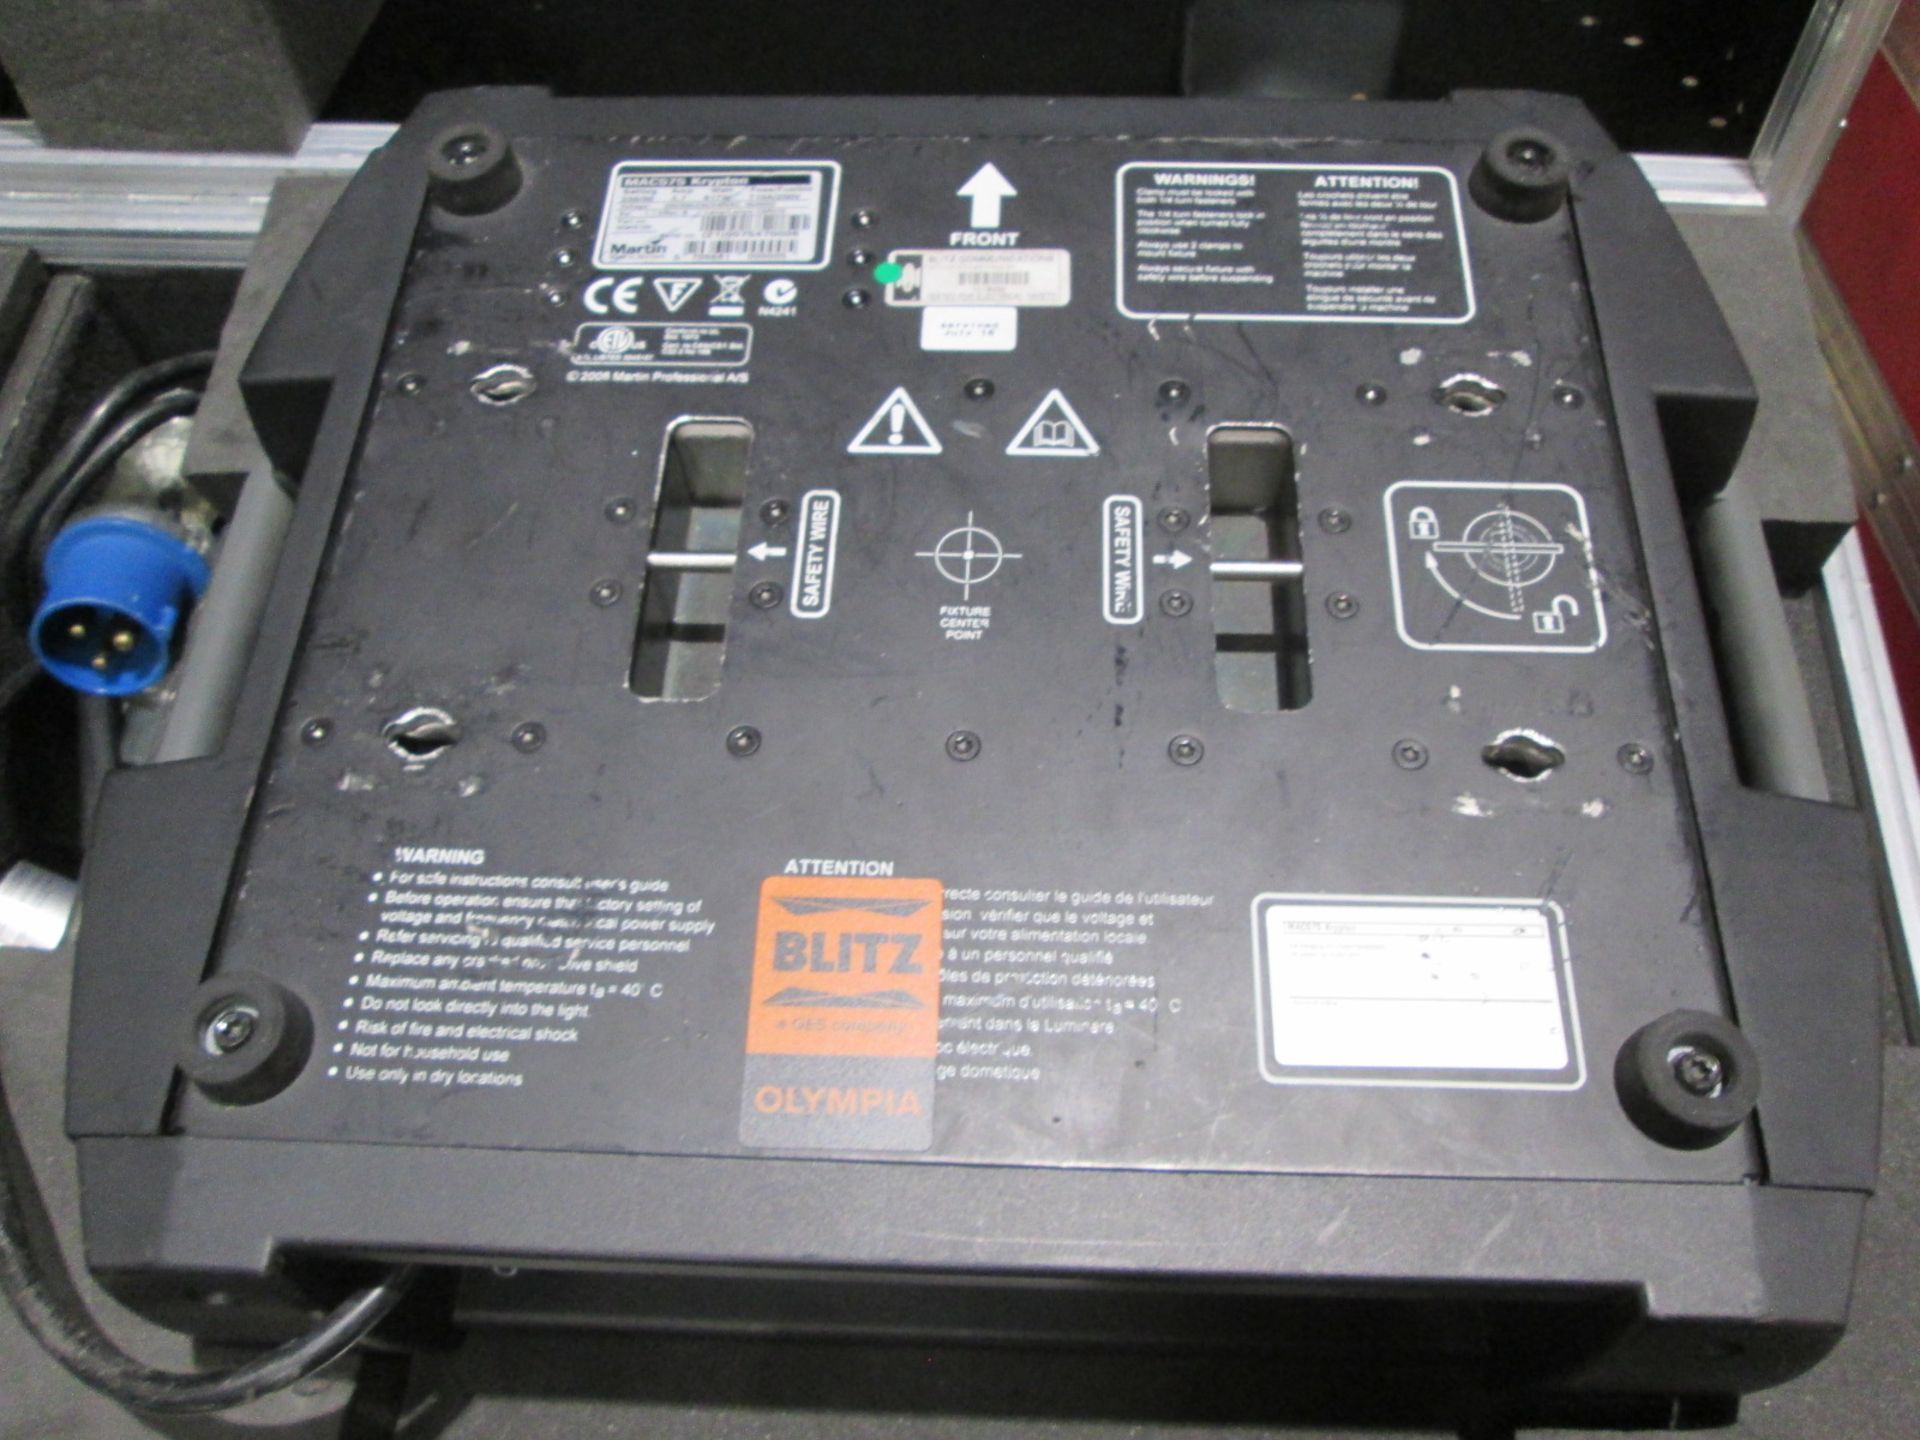 Martin MAC575 Kryton Moving Spot Light (Qty 2) In flight case with hanging brackets. S/N - Image 7 of 10